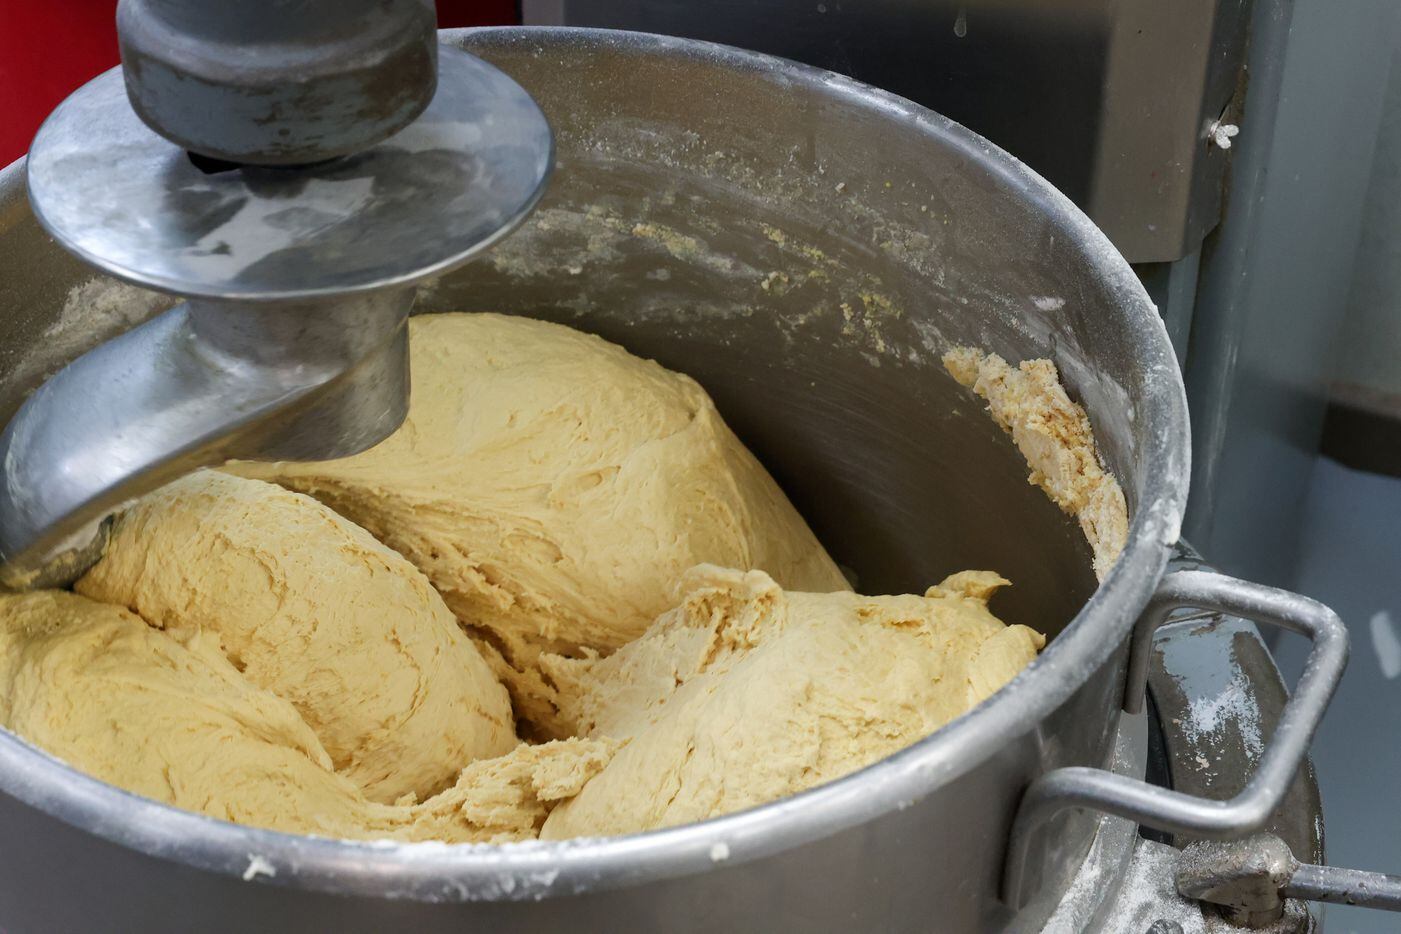 Dough for Rosca de Reyes is being kneaded at the Tango Bakery in Garland on Thursday, January 5...